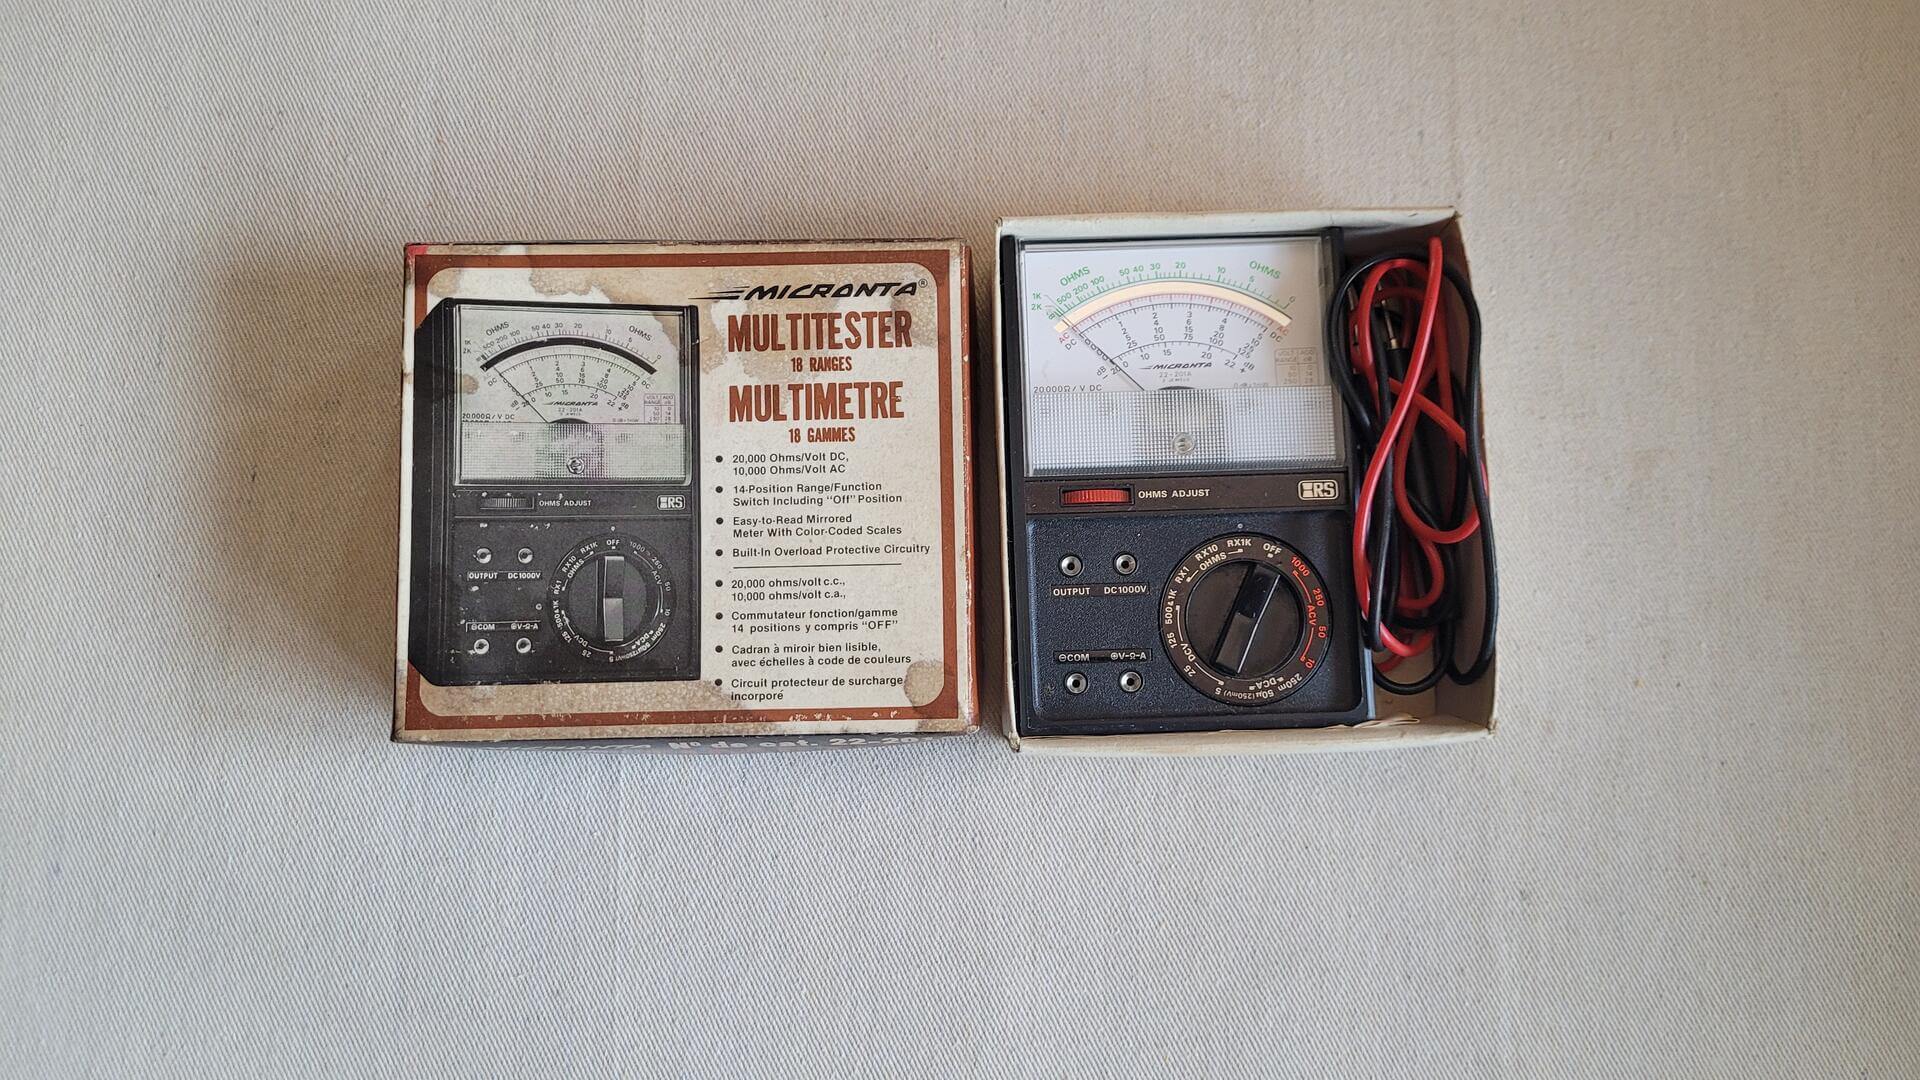 Vintage Micronta analog multimeter 22-201A 18 ranges multitester tool with the original box. 1970s made in Korea collectible automotive and electronics service and lab equipment from Radio Shack / Tandy